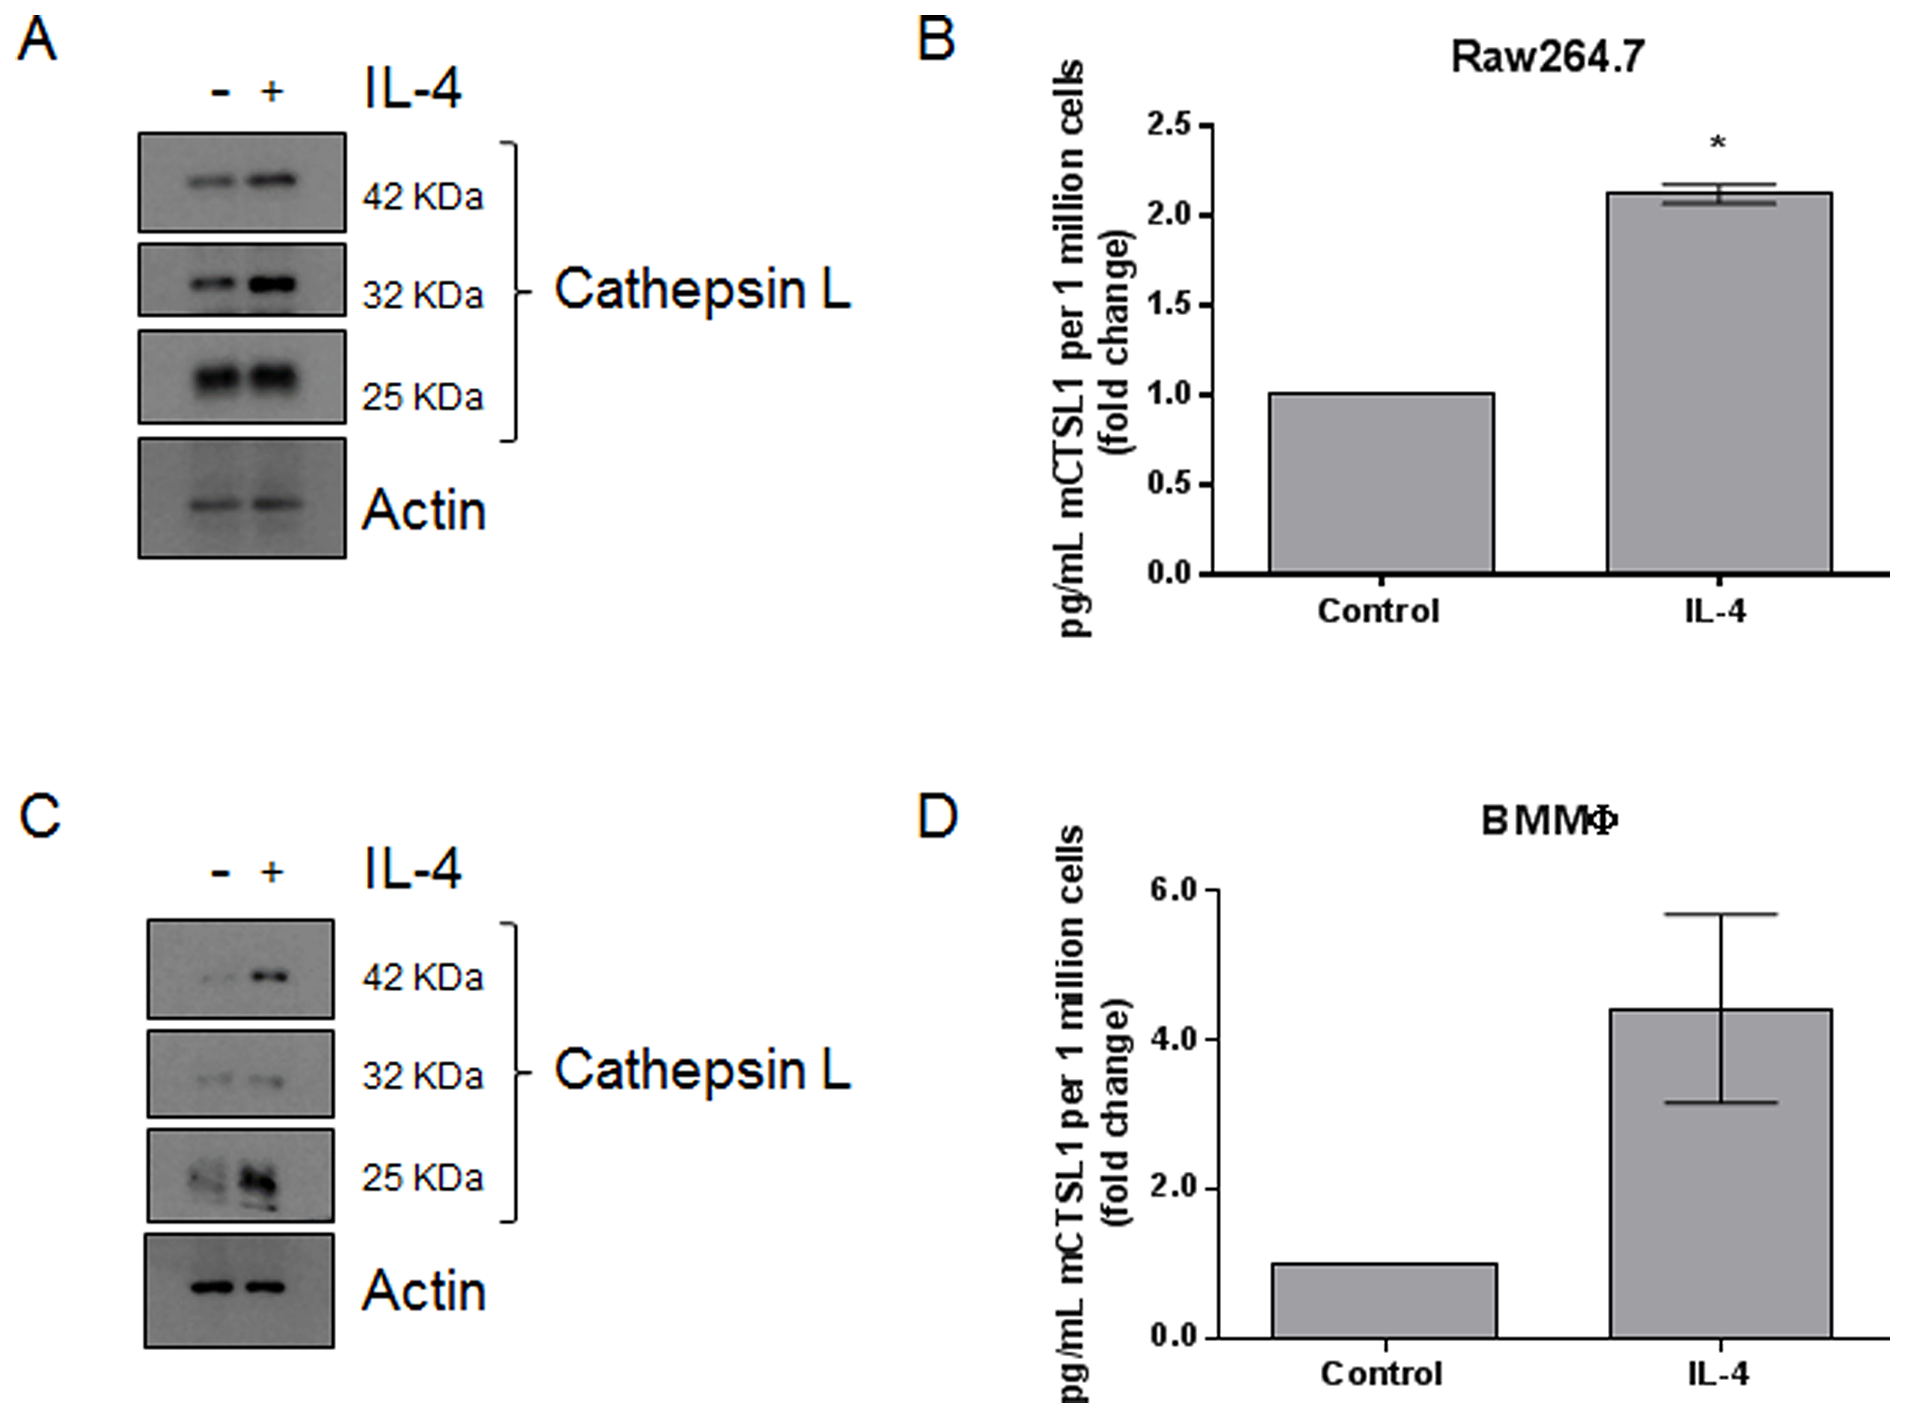 IL-4 upregulates the expression and secretion of cathepsin L from macrophages.